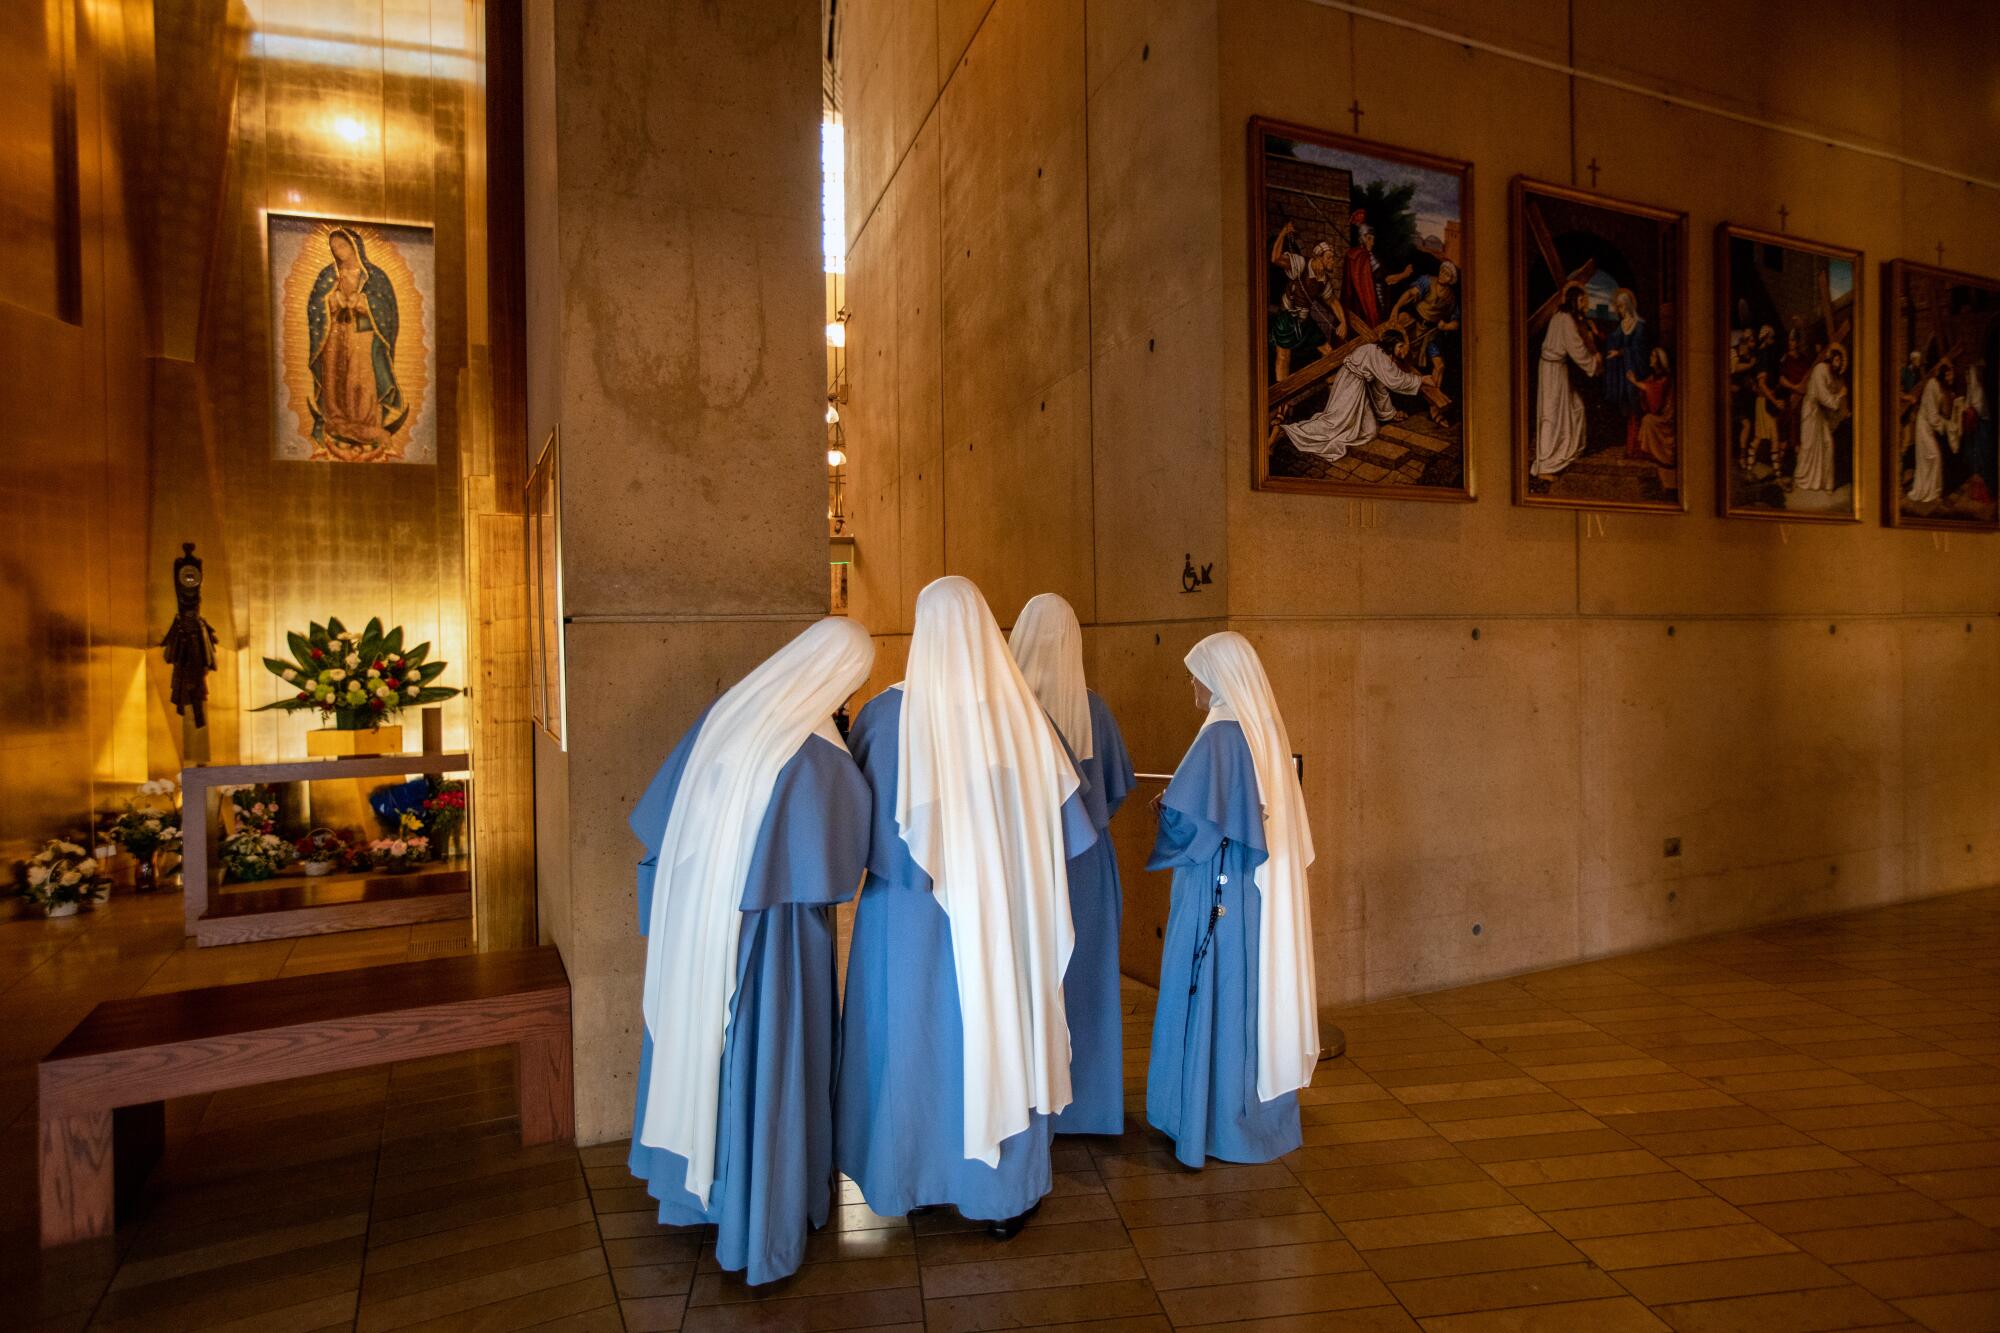 Four nuns in blue and white habits face away in a huddle as they peak into the main hall of a modern stone church.